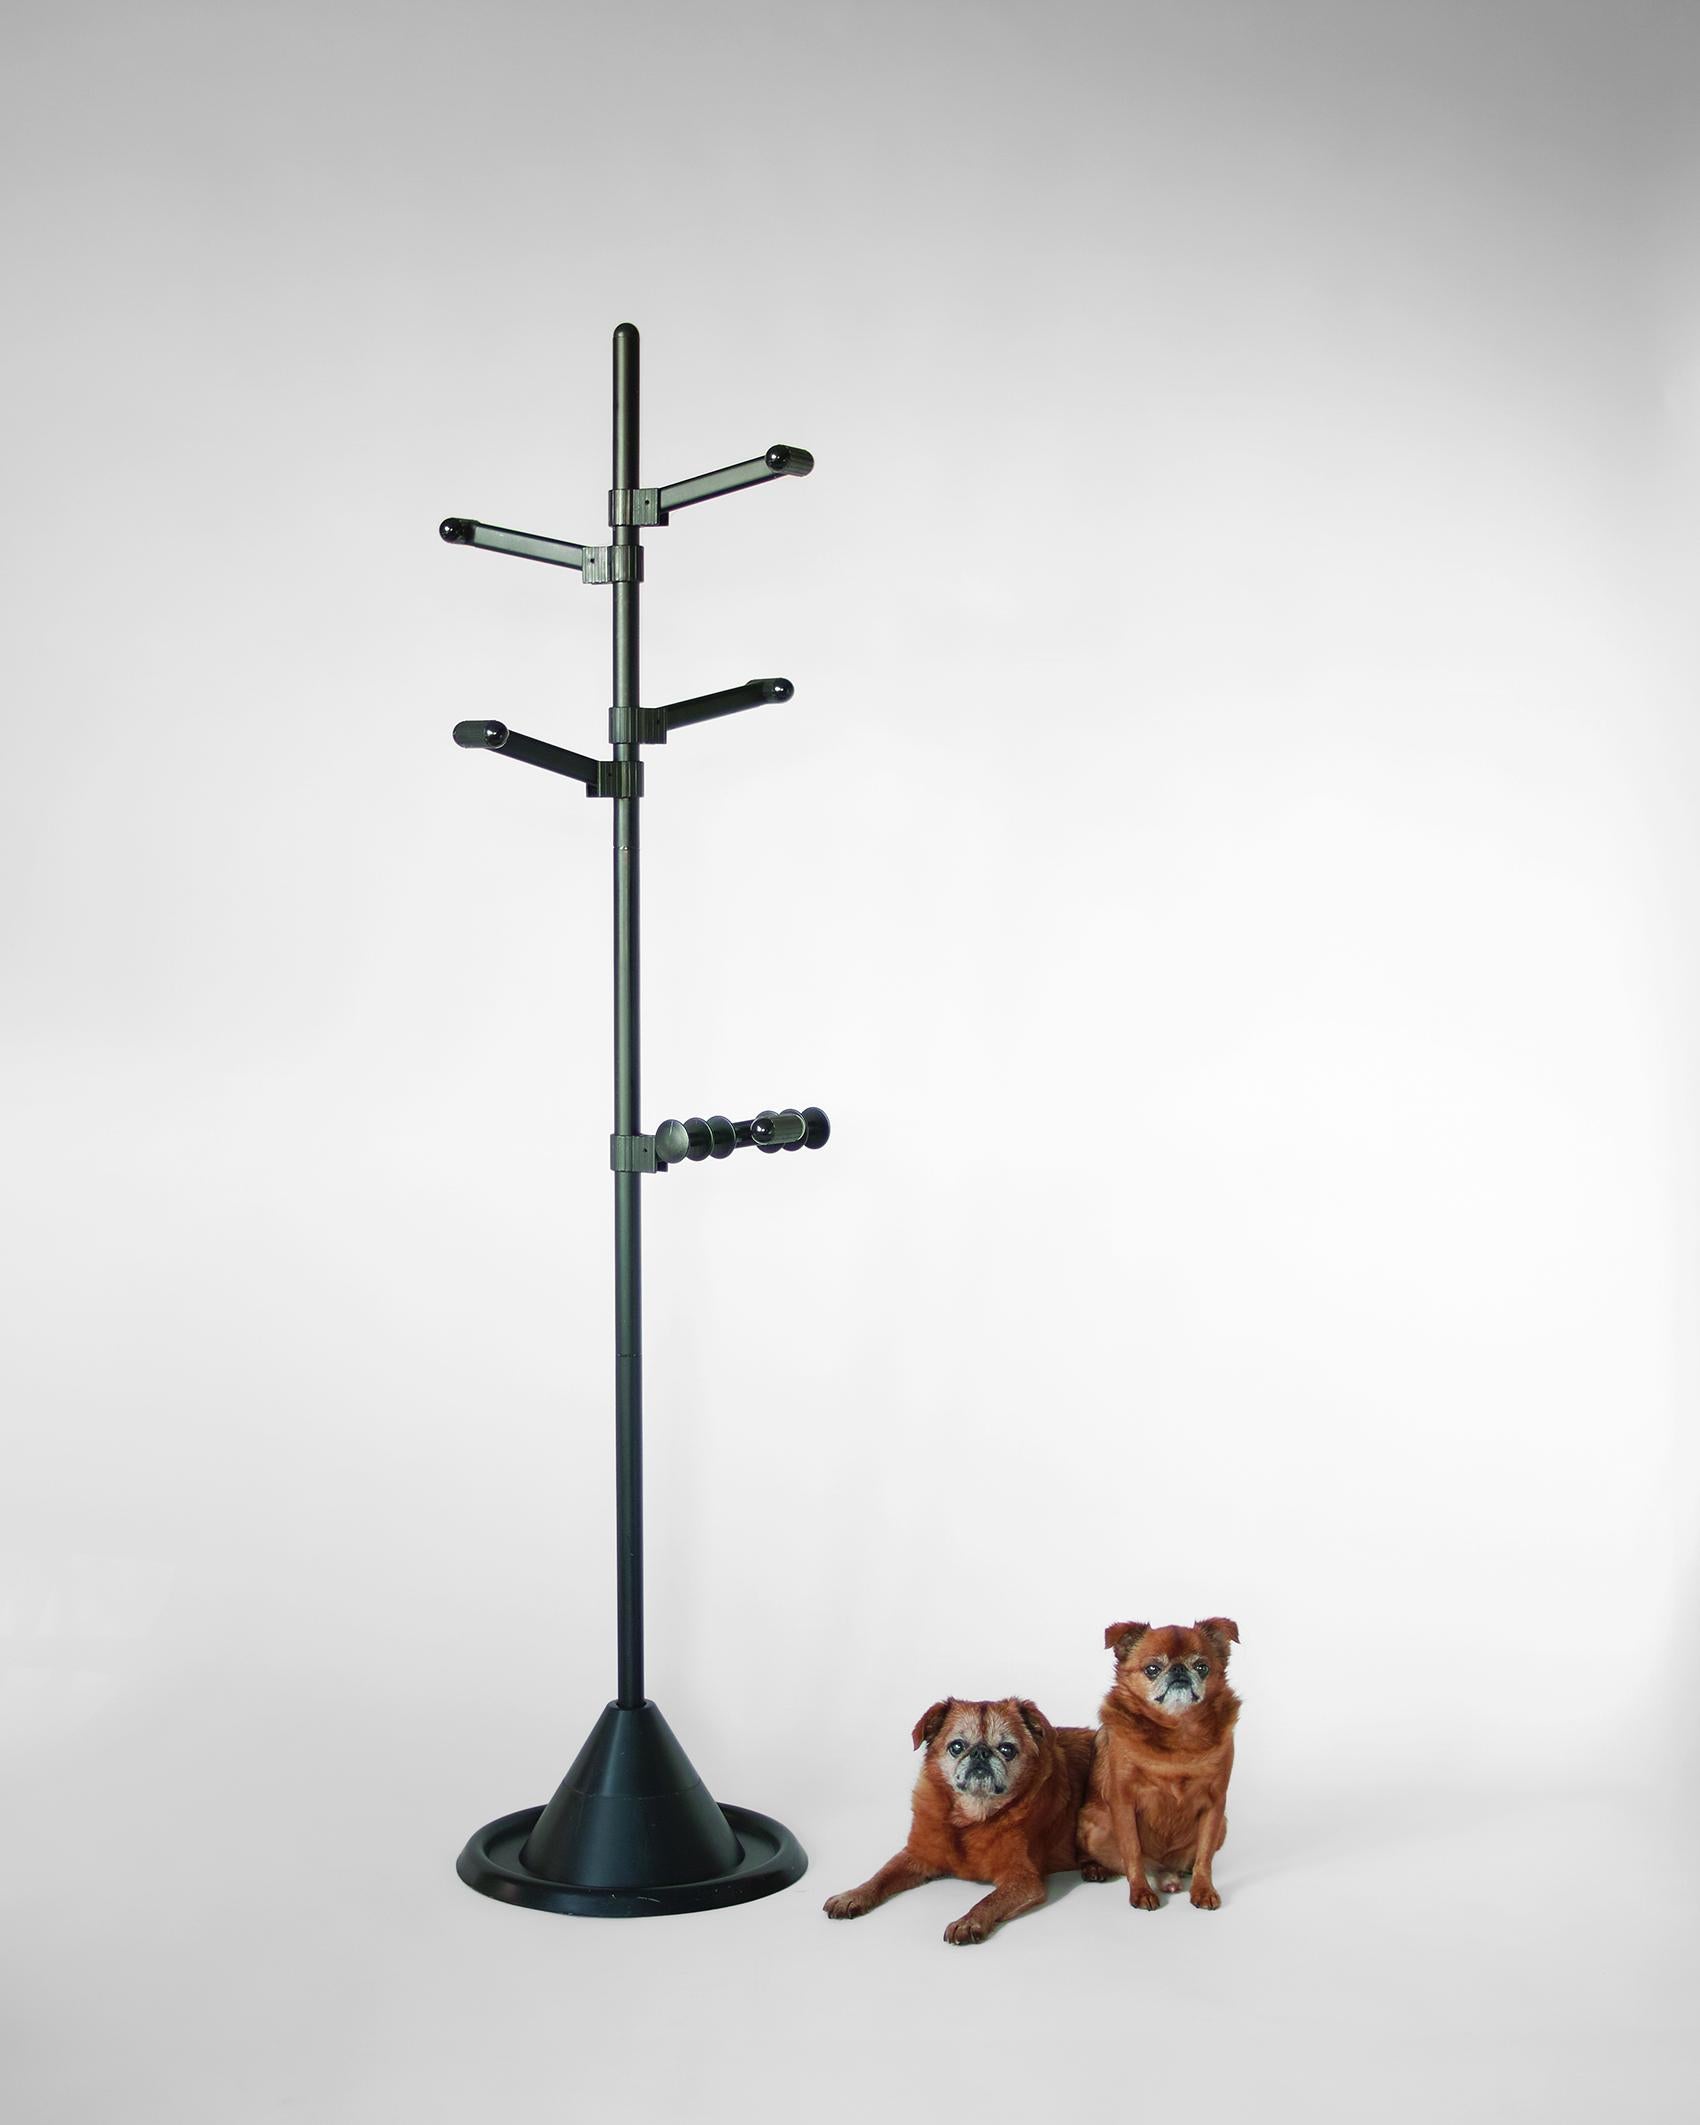 For your consideration is this post-modern coat rack featuring original black finish, five adjustable arms, and nicely weighted conical base. Each arm can raised or lowered and rotated around the central pole. The central pole is comprised of three